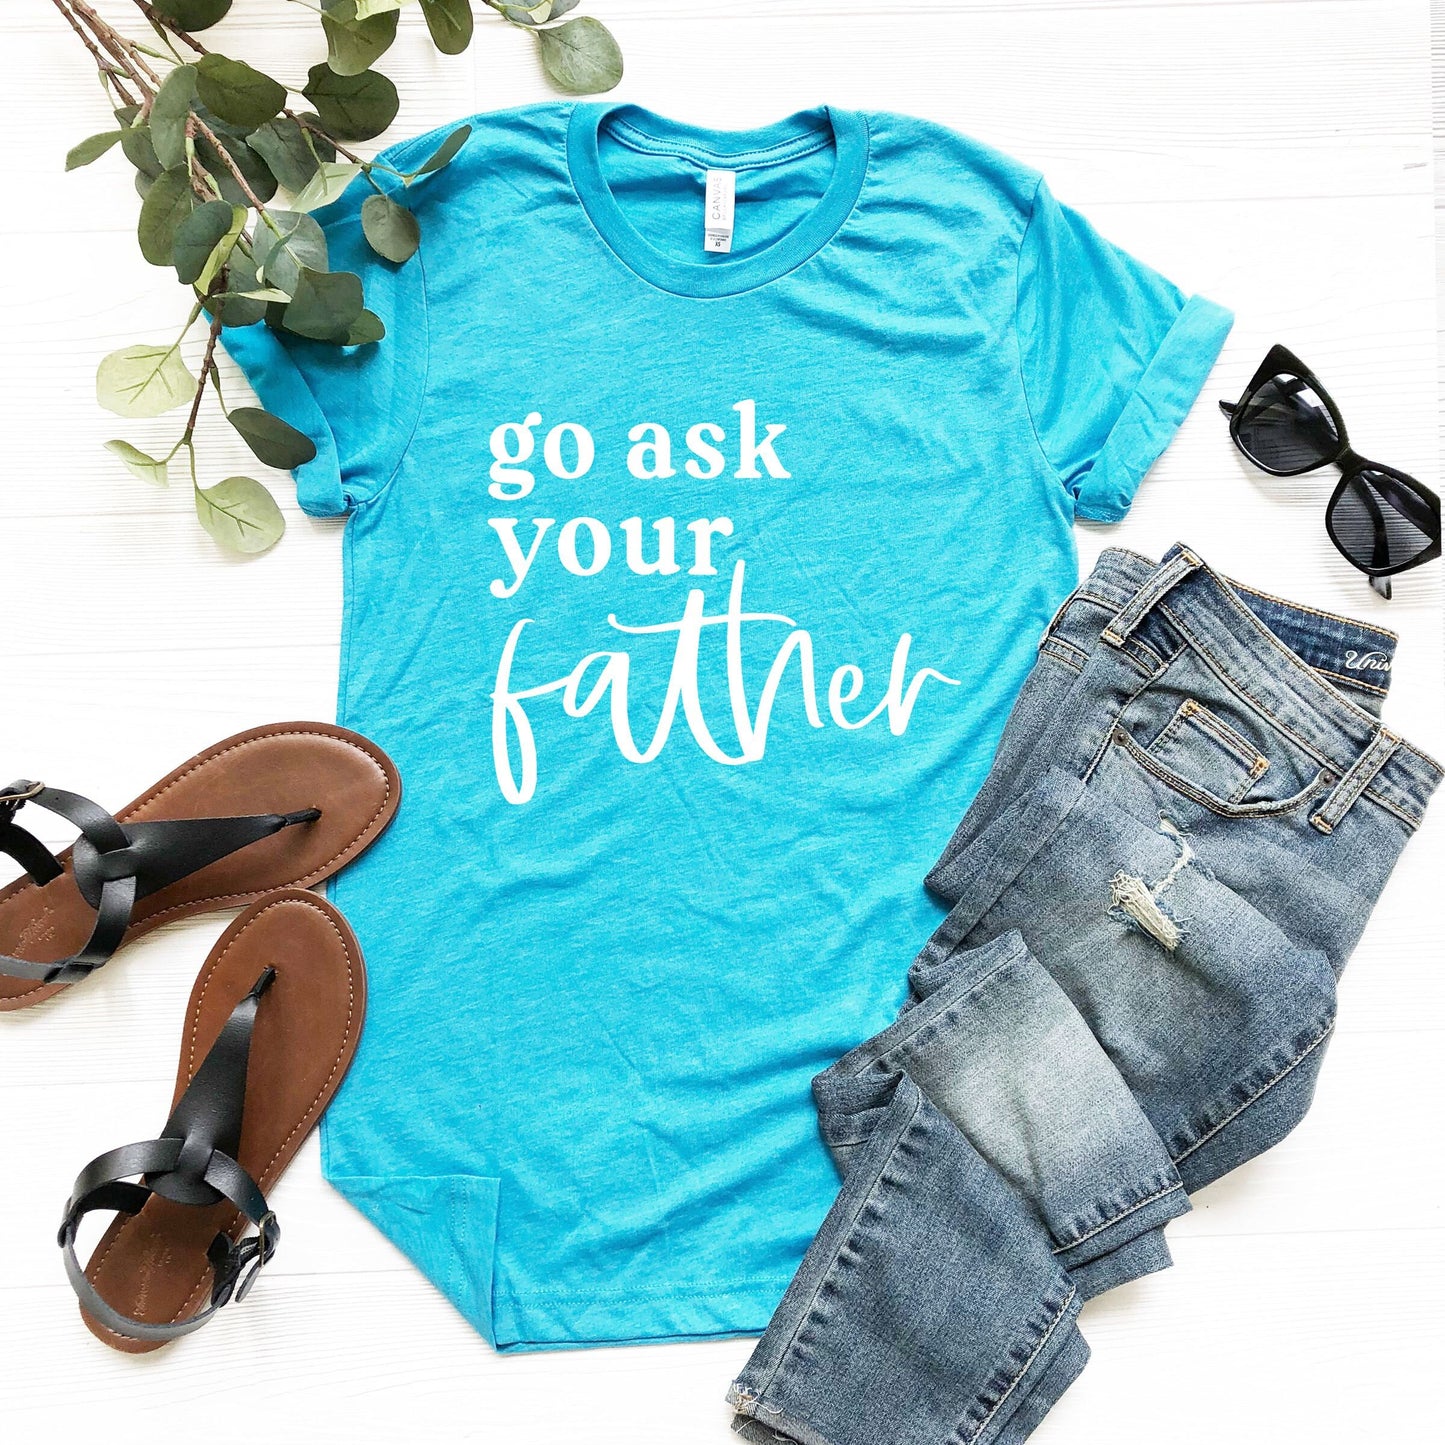 go ask your father tshirt • super soft tees for women • shirt for mom • ask your dad shirt • funny mom shirt